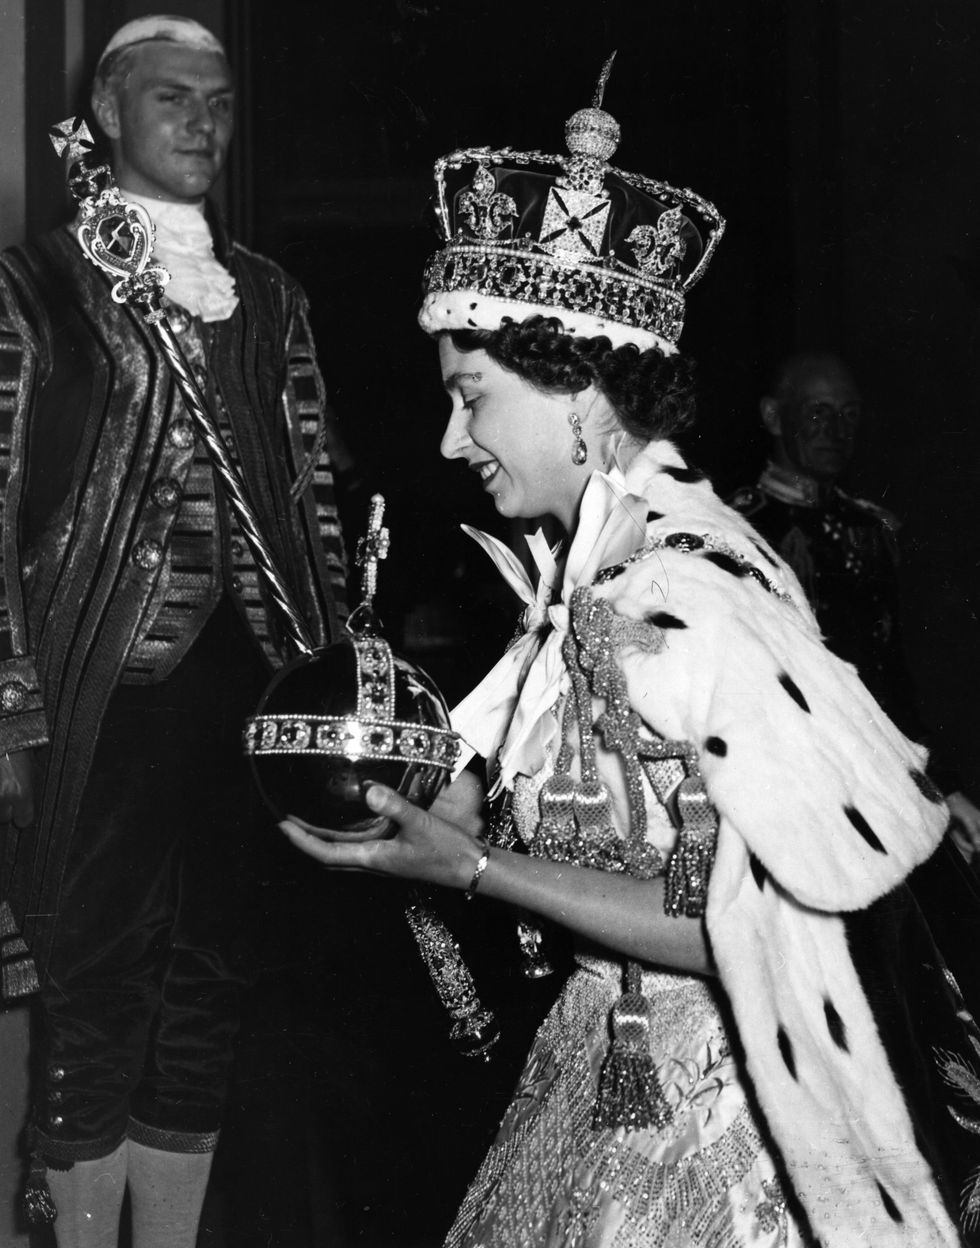 queen elizabeth ii wearing the imperial state crown and carrying the orb and sceptre, leaving the state coach and entering buckingham palace, after  the coronation  original publication picture post   6537   the coronation of queen elizabeth ii   pub 1953   photo by hulton archivegetty images